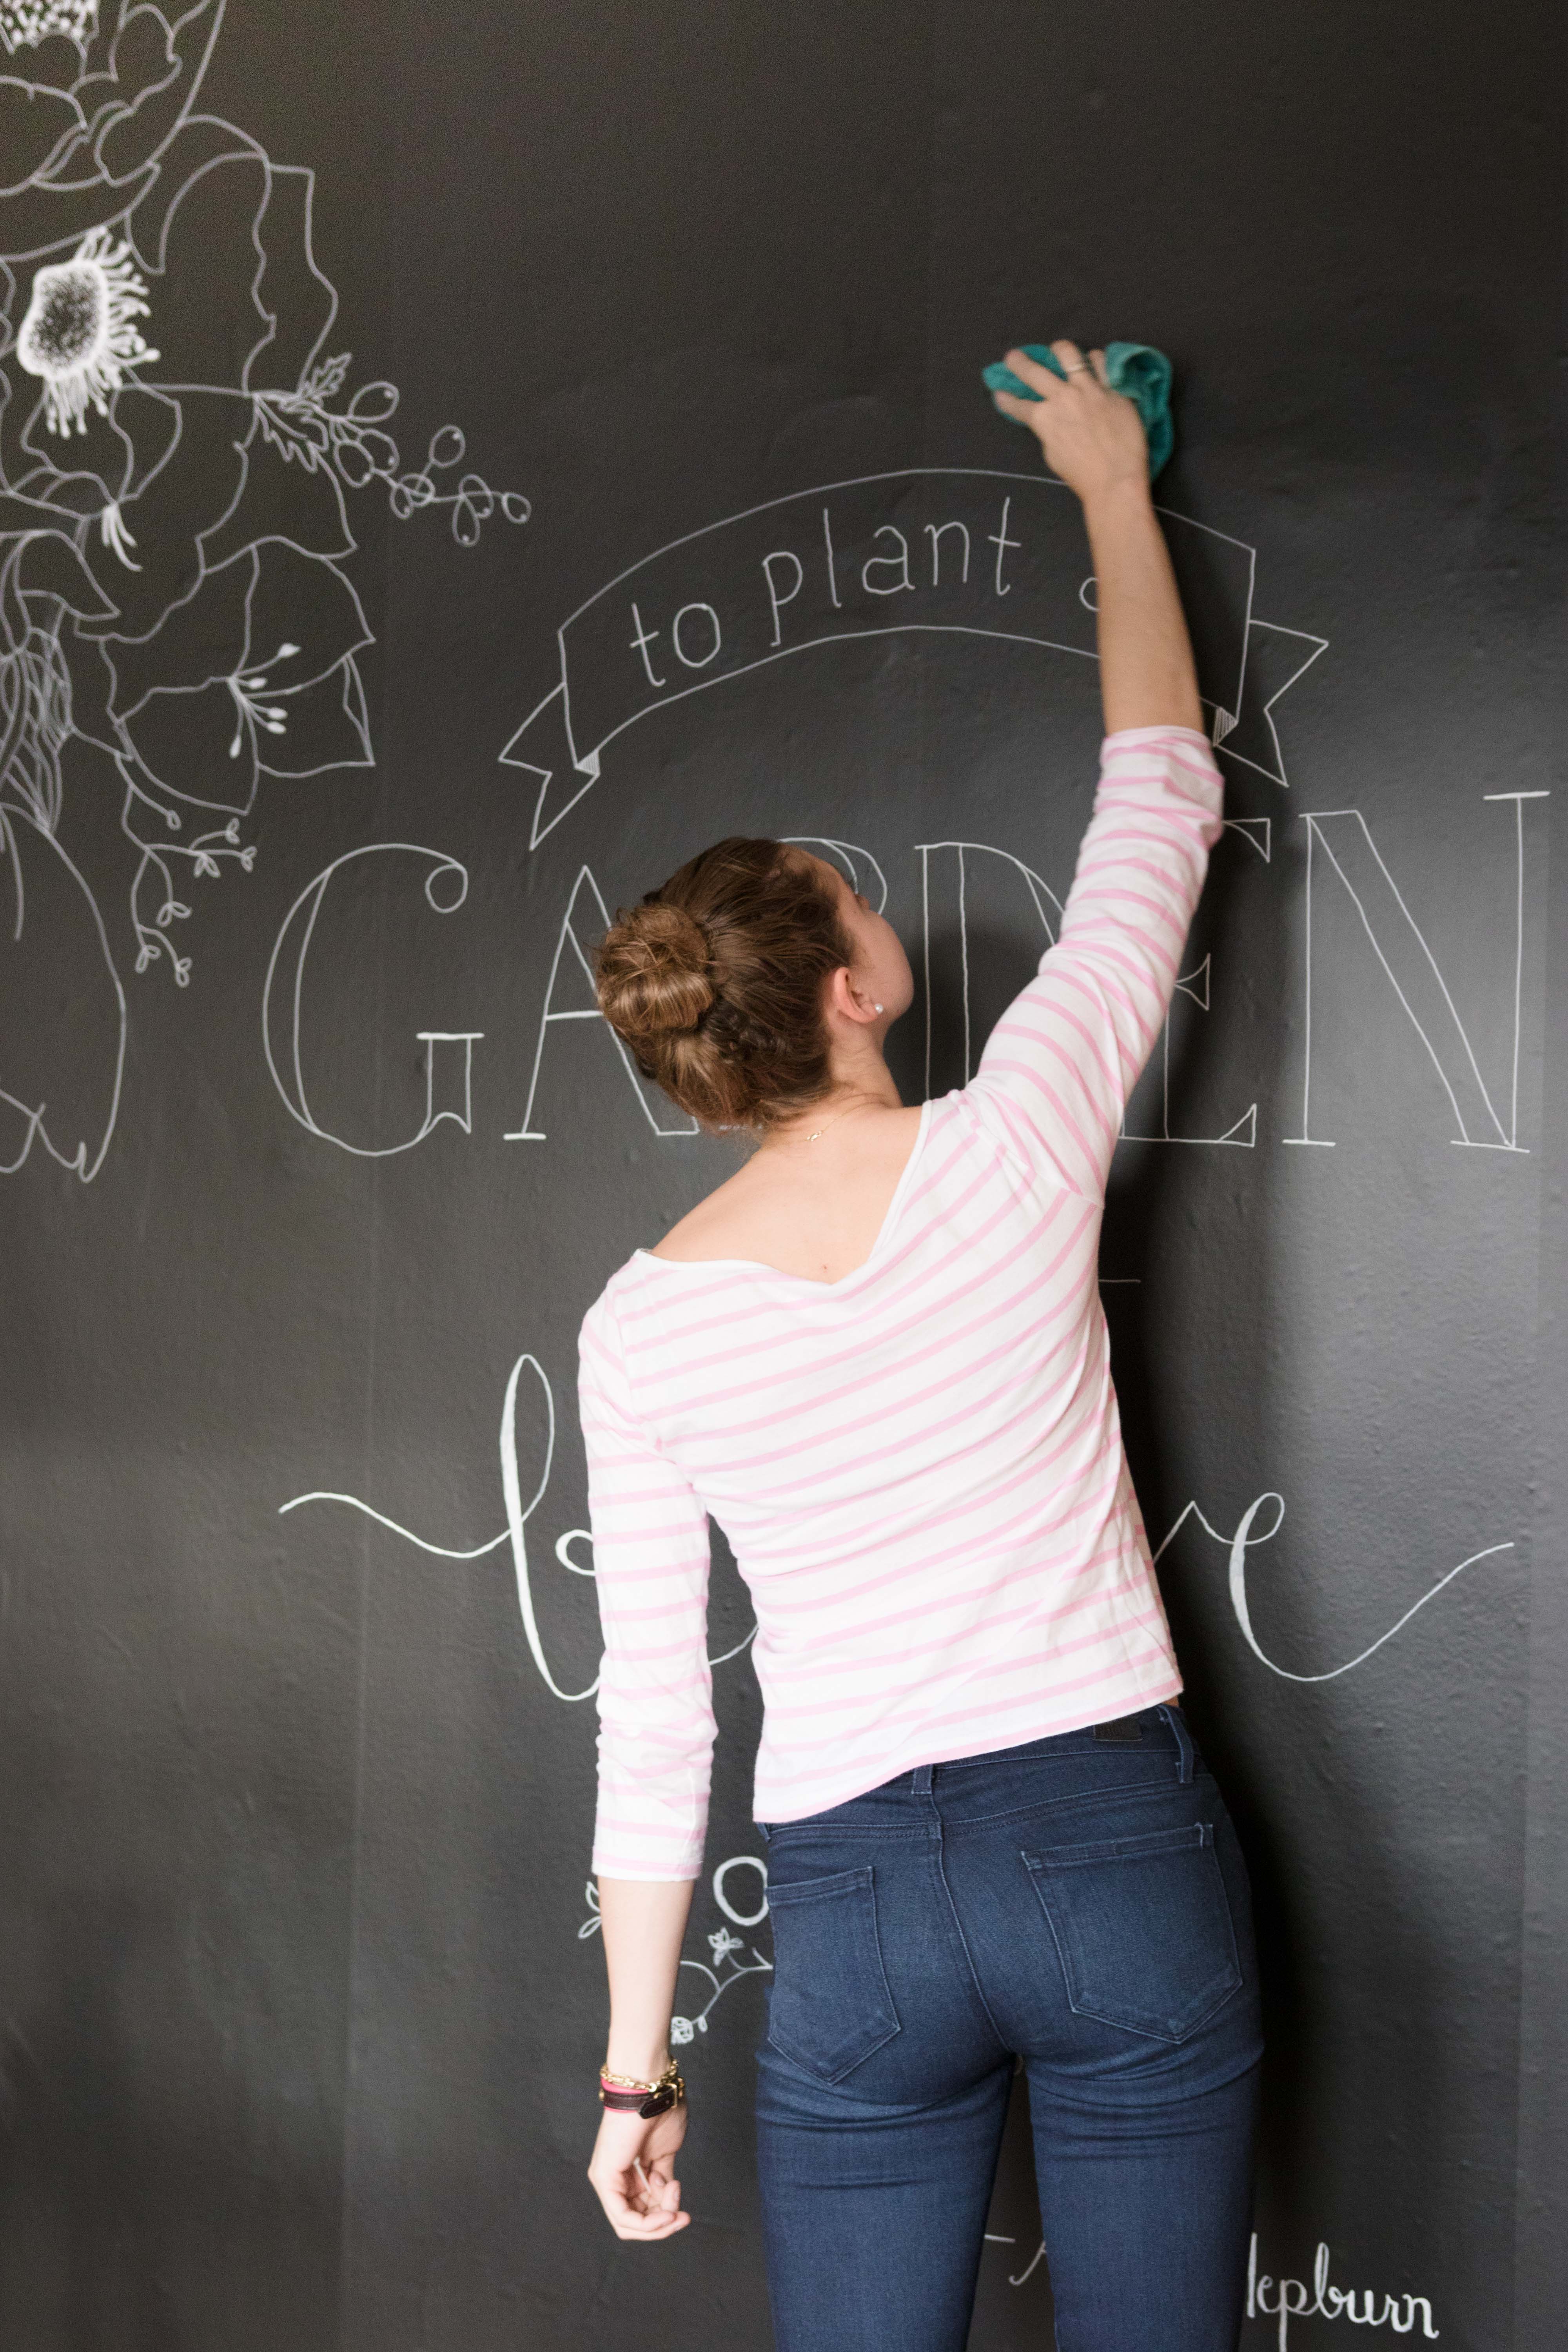 Cleaning Chalkboard Peel and Stick Wallpaper